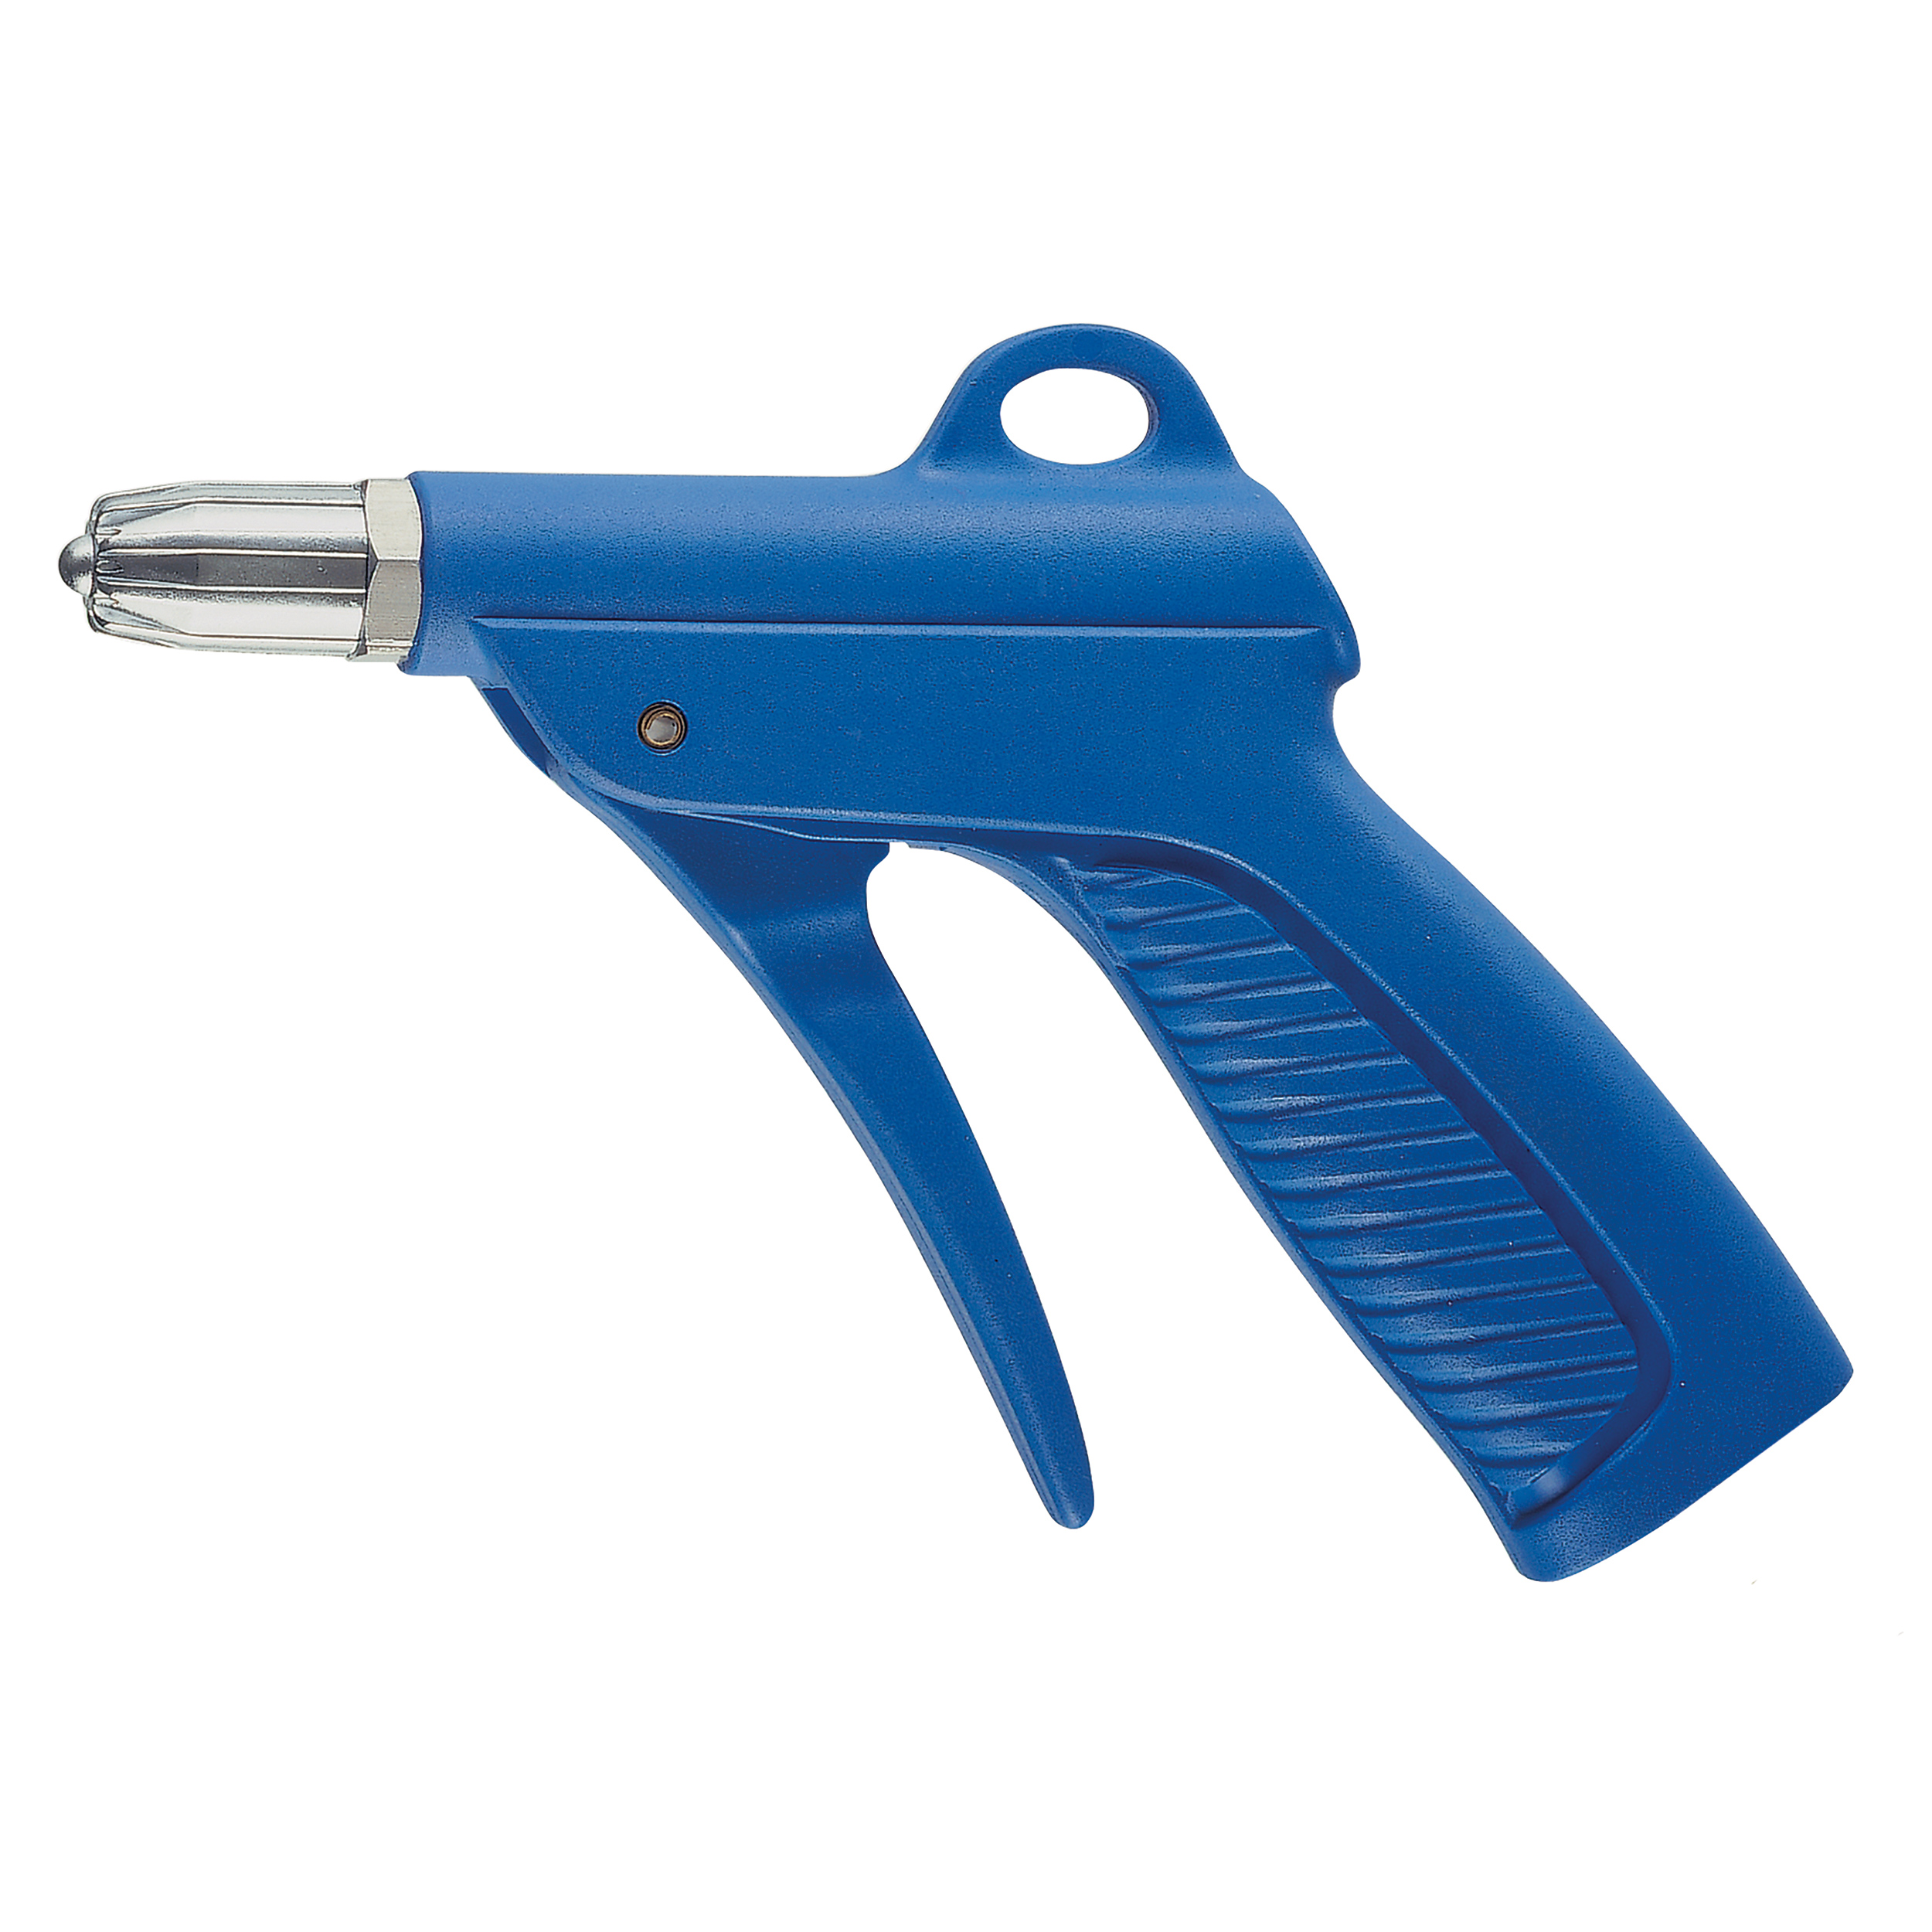 Blow gun, polyamide, blue, MOP 145 psi/10 bar, two-parts noise reducing and safety nozzle blowstar, G¼ female